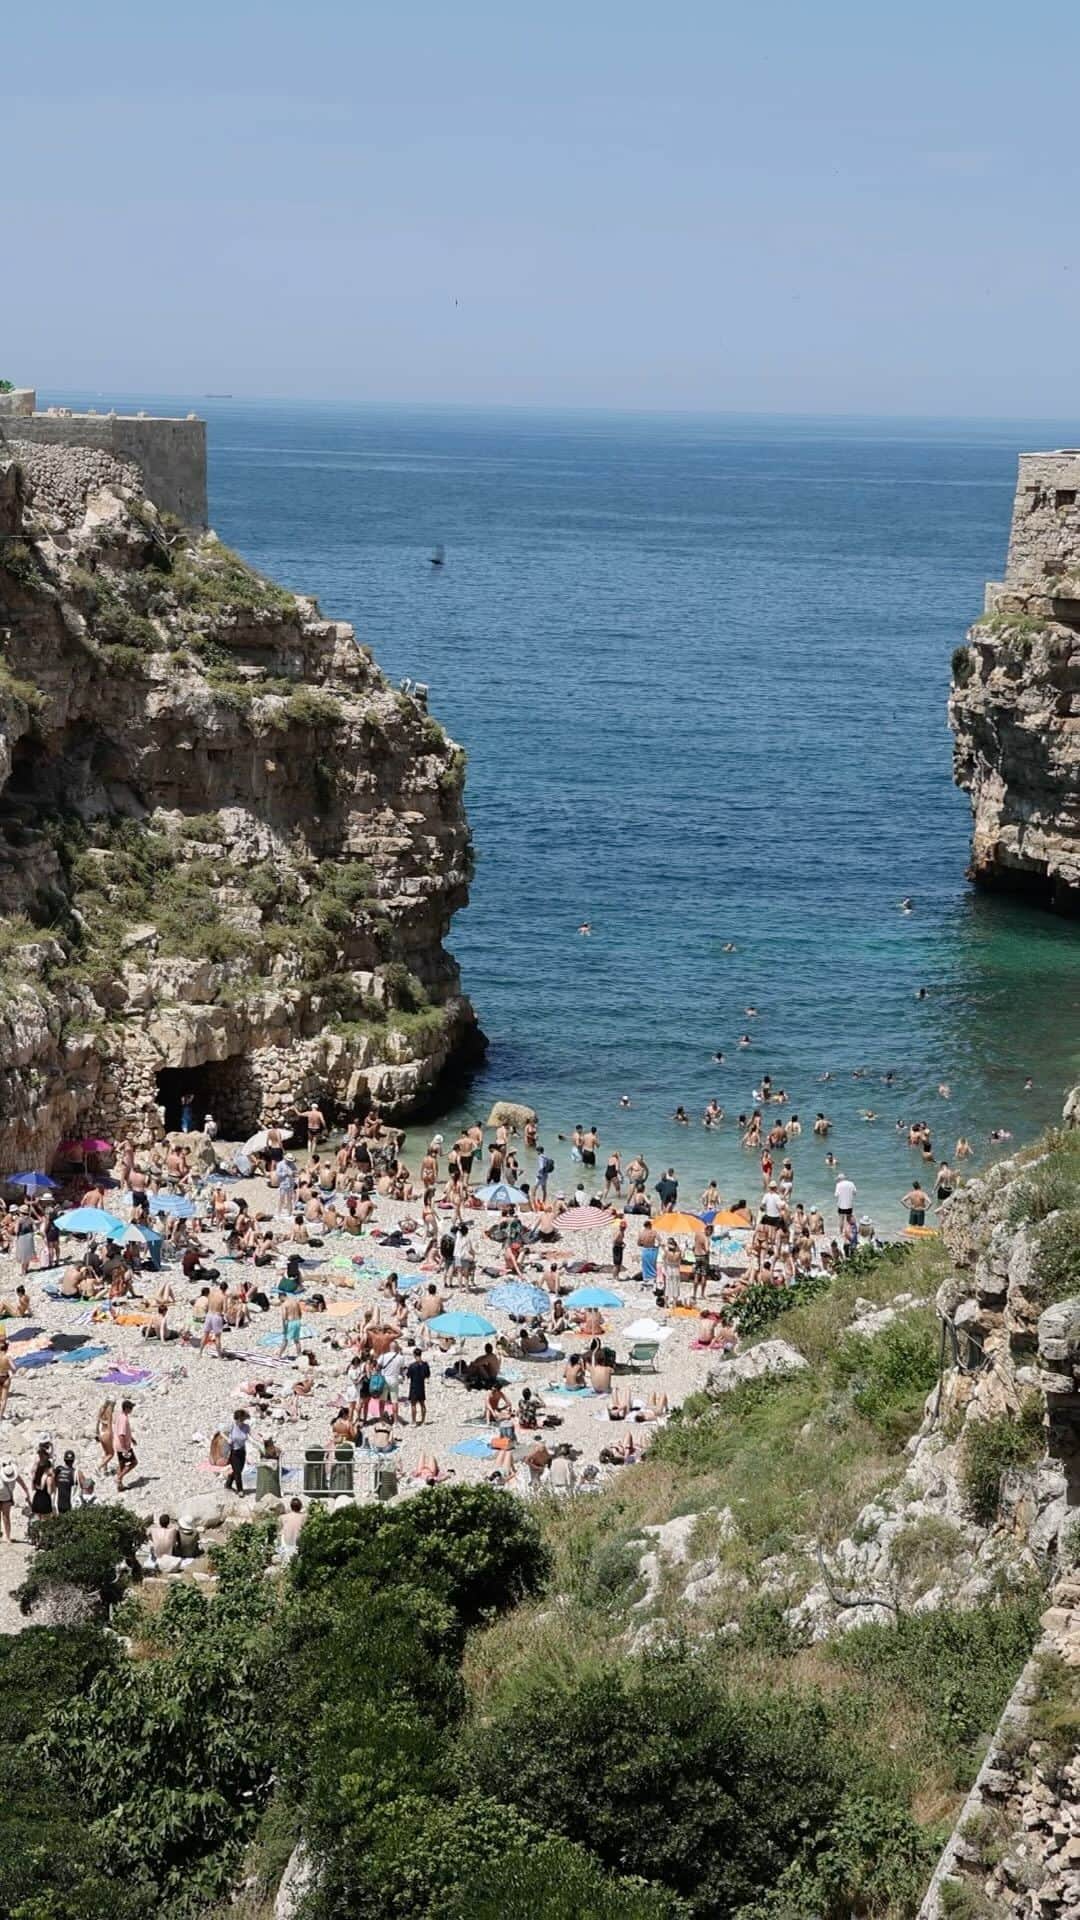 Samuel Lippkeのインスタグラム：「Polignano A Mare, Italy.  June 20, 2023 I love being able to relive this beautiful beach and scene. Also fun to see our hotel room patio towards the end of the video up on the cliff to the left. I haven't had much time to do any reels lately but loved this clip, enjoy.  #thelippkesdoitaly #polignanoamare #beachesofitaly」